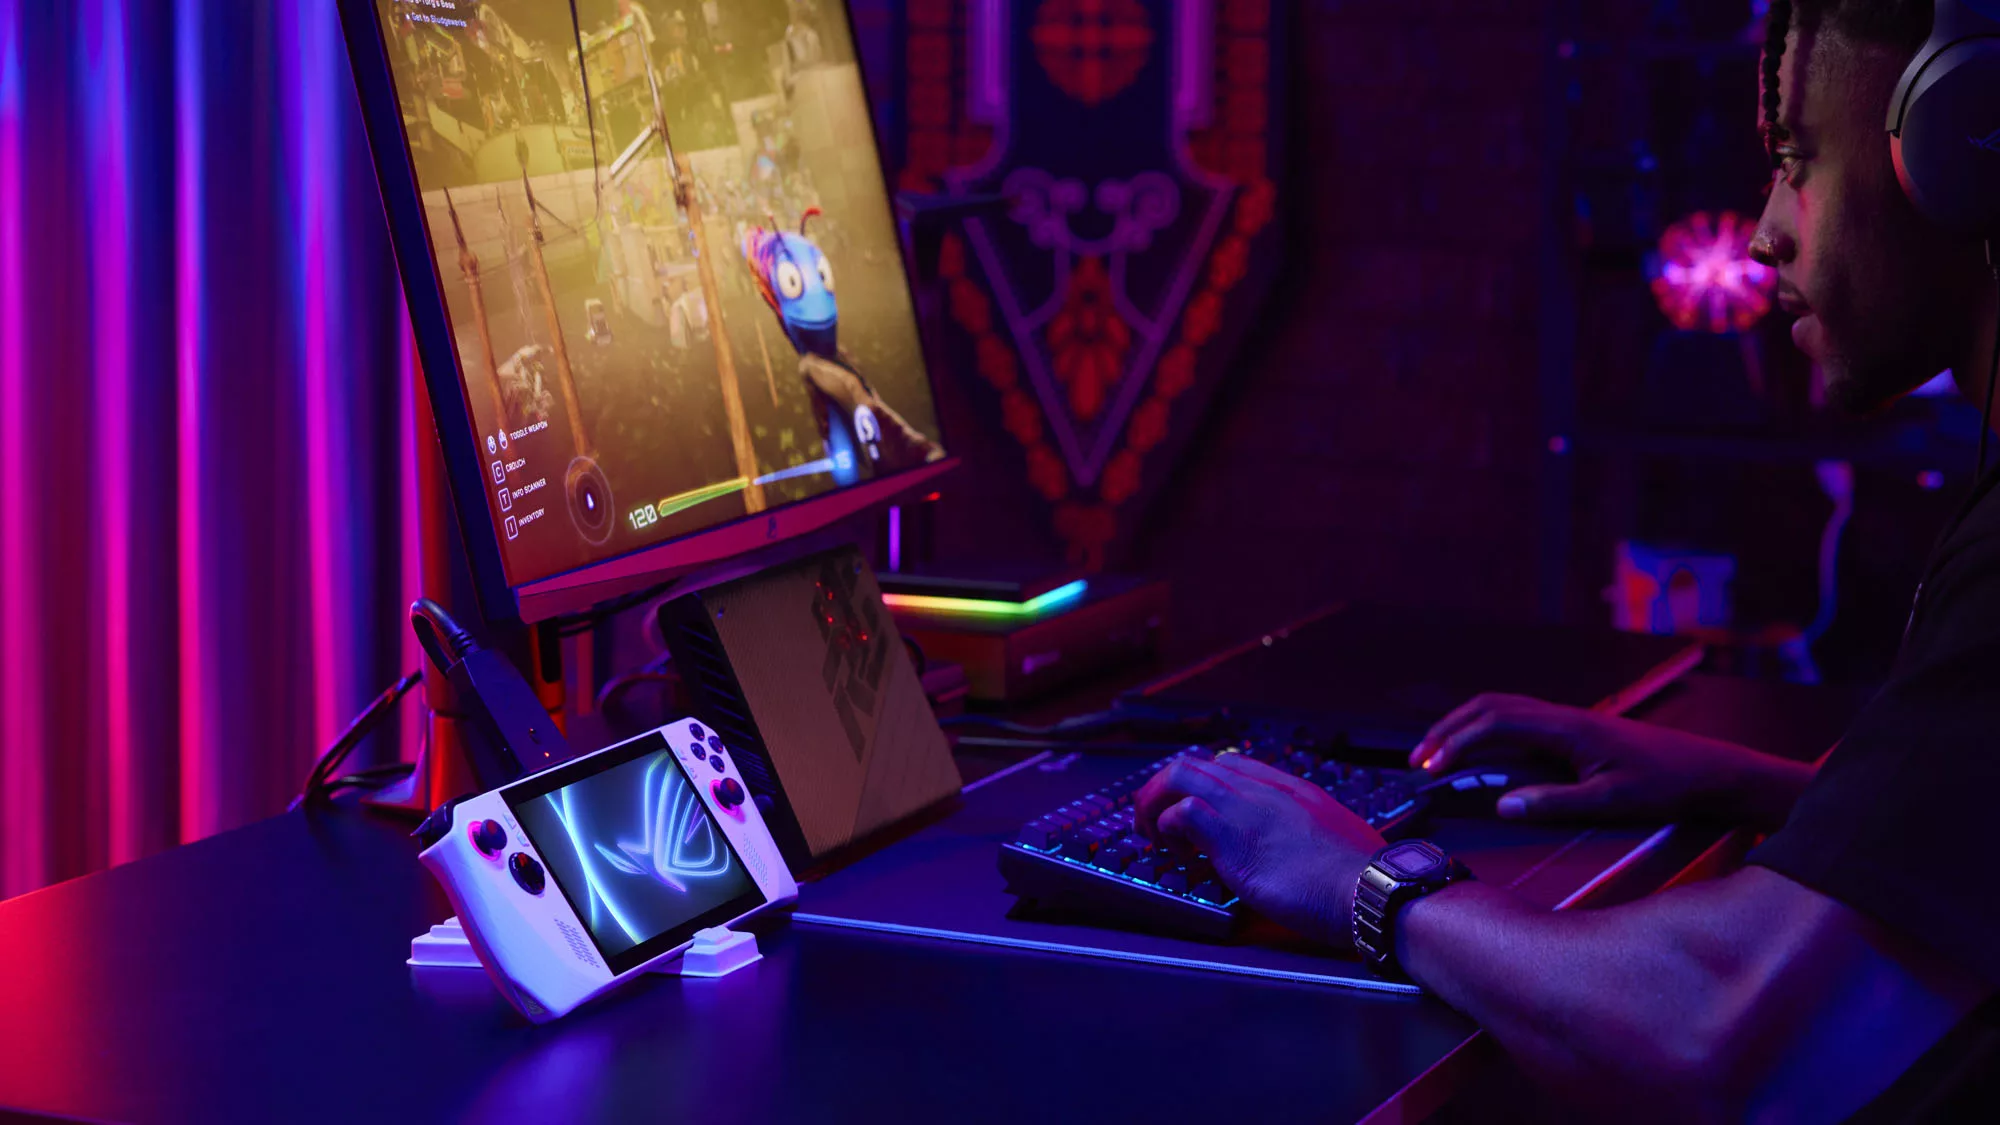 A screenshot of a man in a dark room playing video games with a monitor, mouse, and keyboard hooked up to the ROG Ally and XG Mobile external GPU.